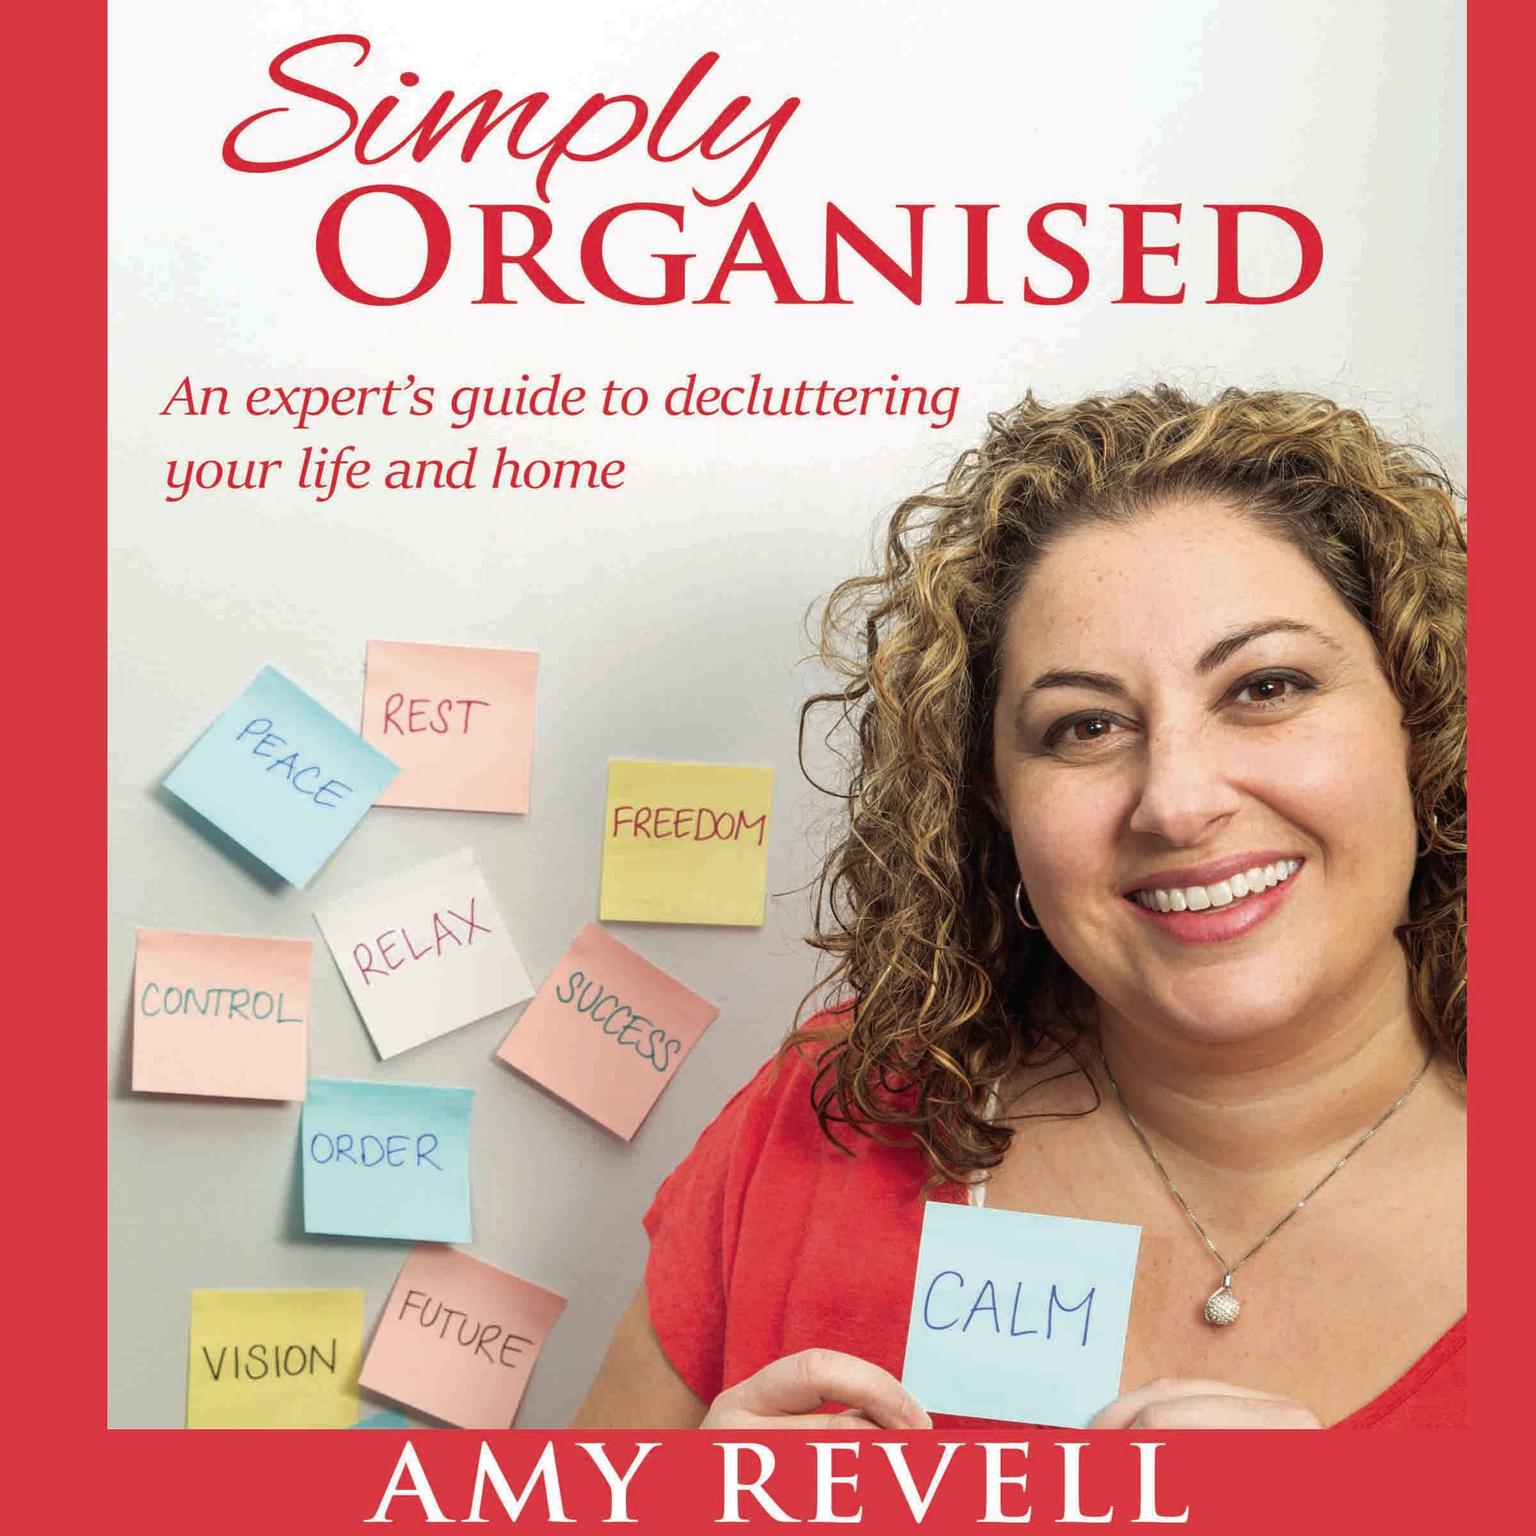 Simply Organized: An Expert’s Guide to Decluttering Your Life and Home Audiobook, by Amy Revell